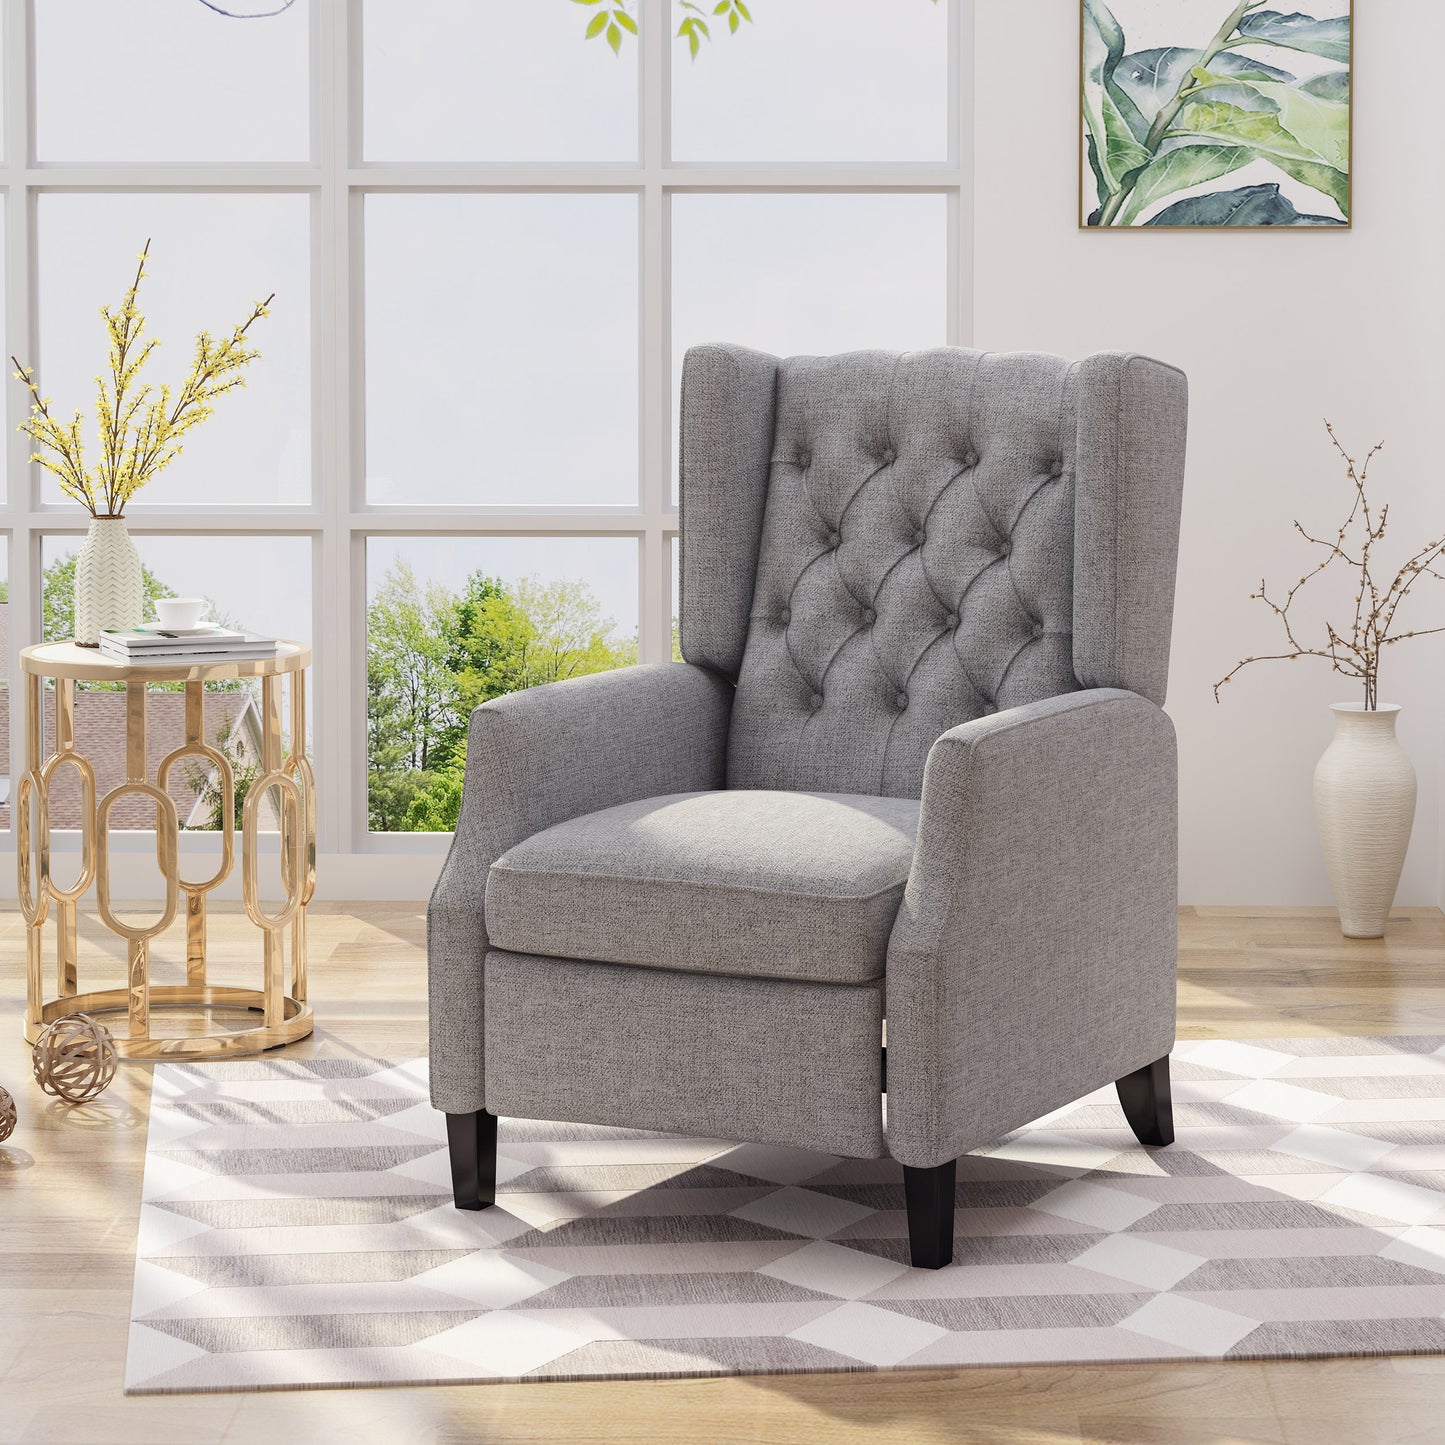 Diana Traditional Wingback Recliner